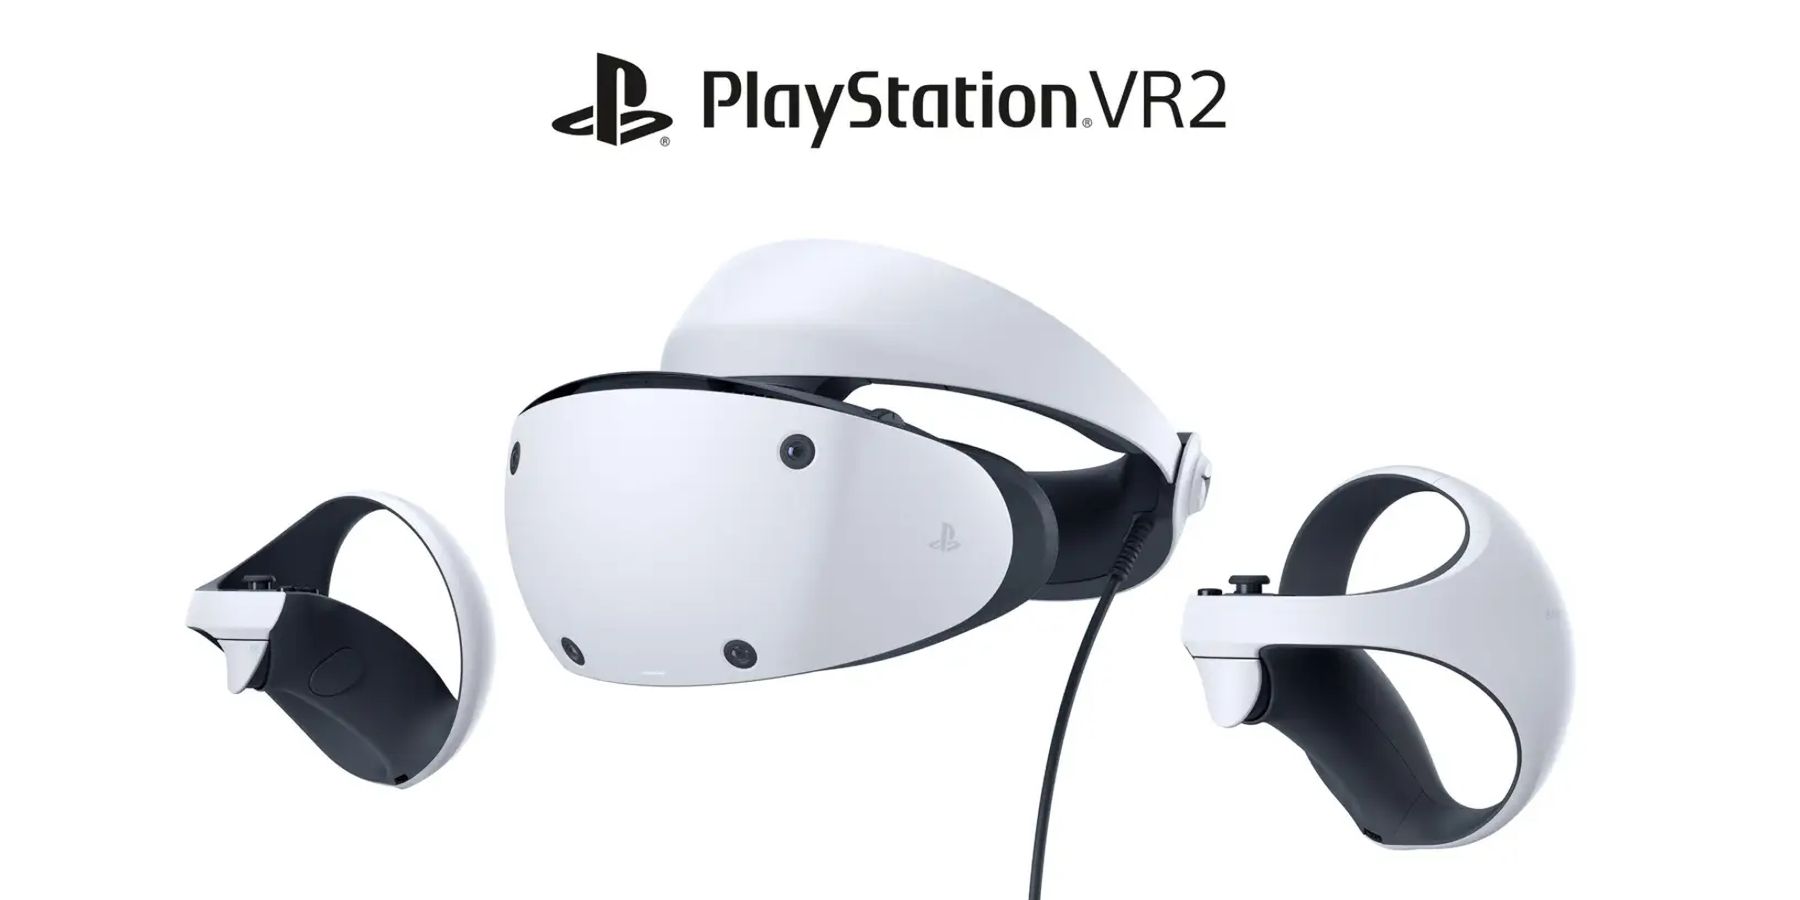 playstation vr2 headset and controllers